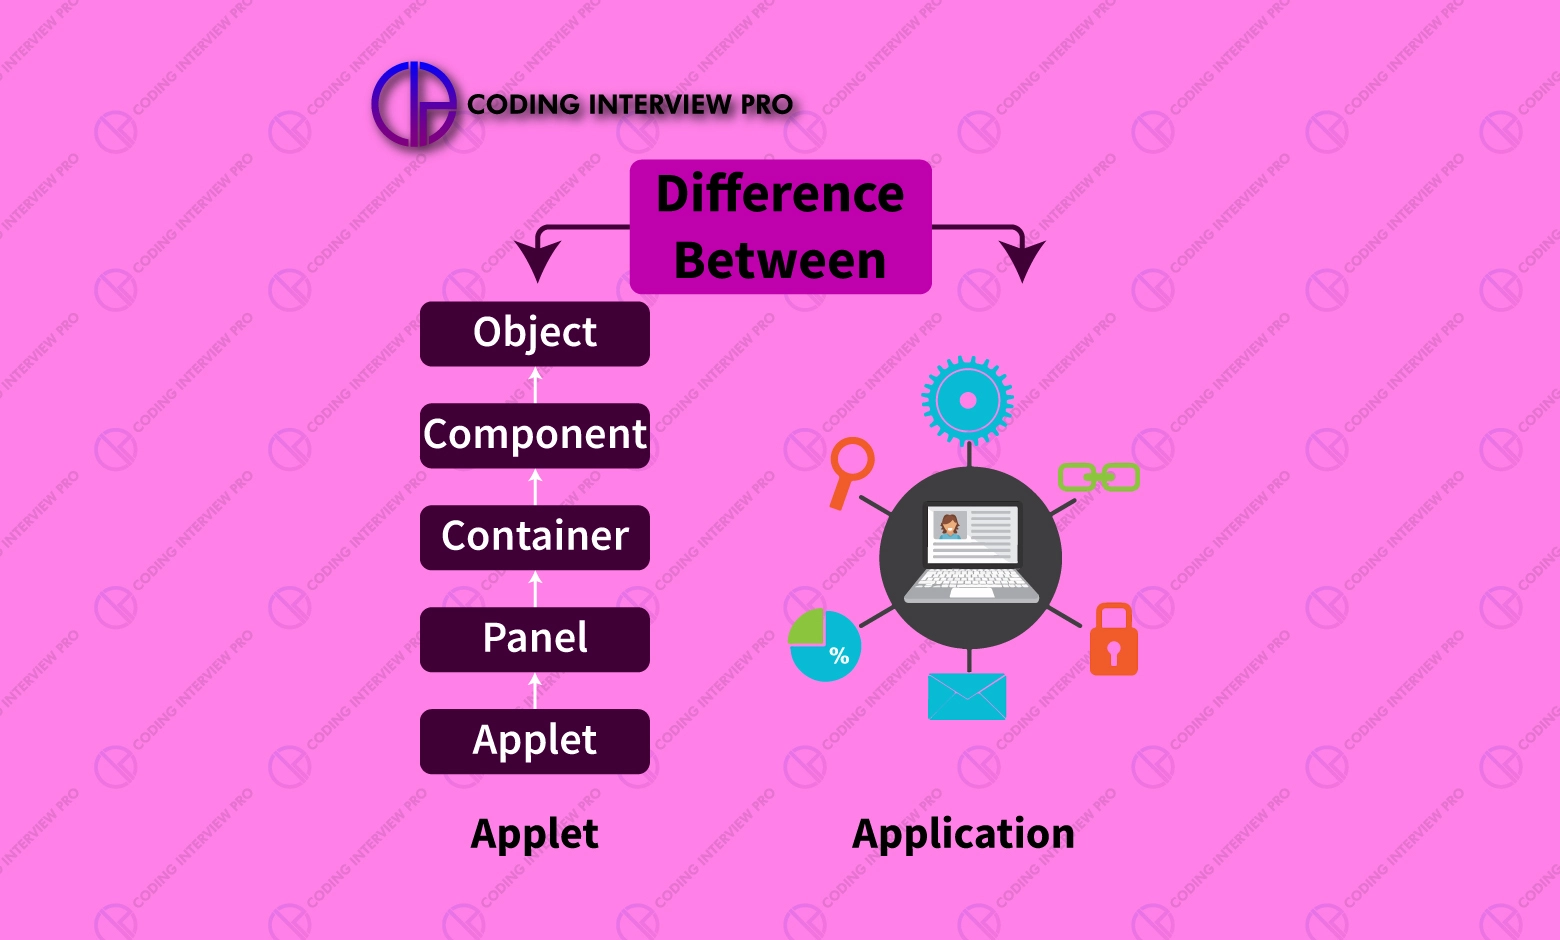 Difference Between Applet And Application